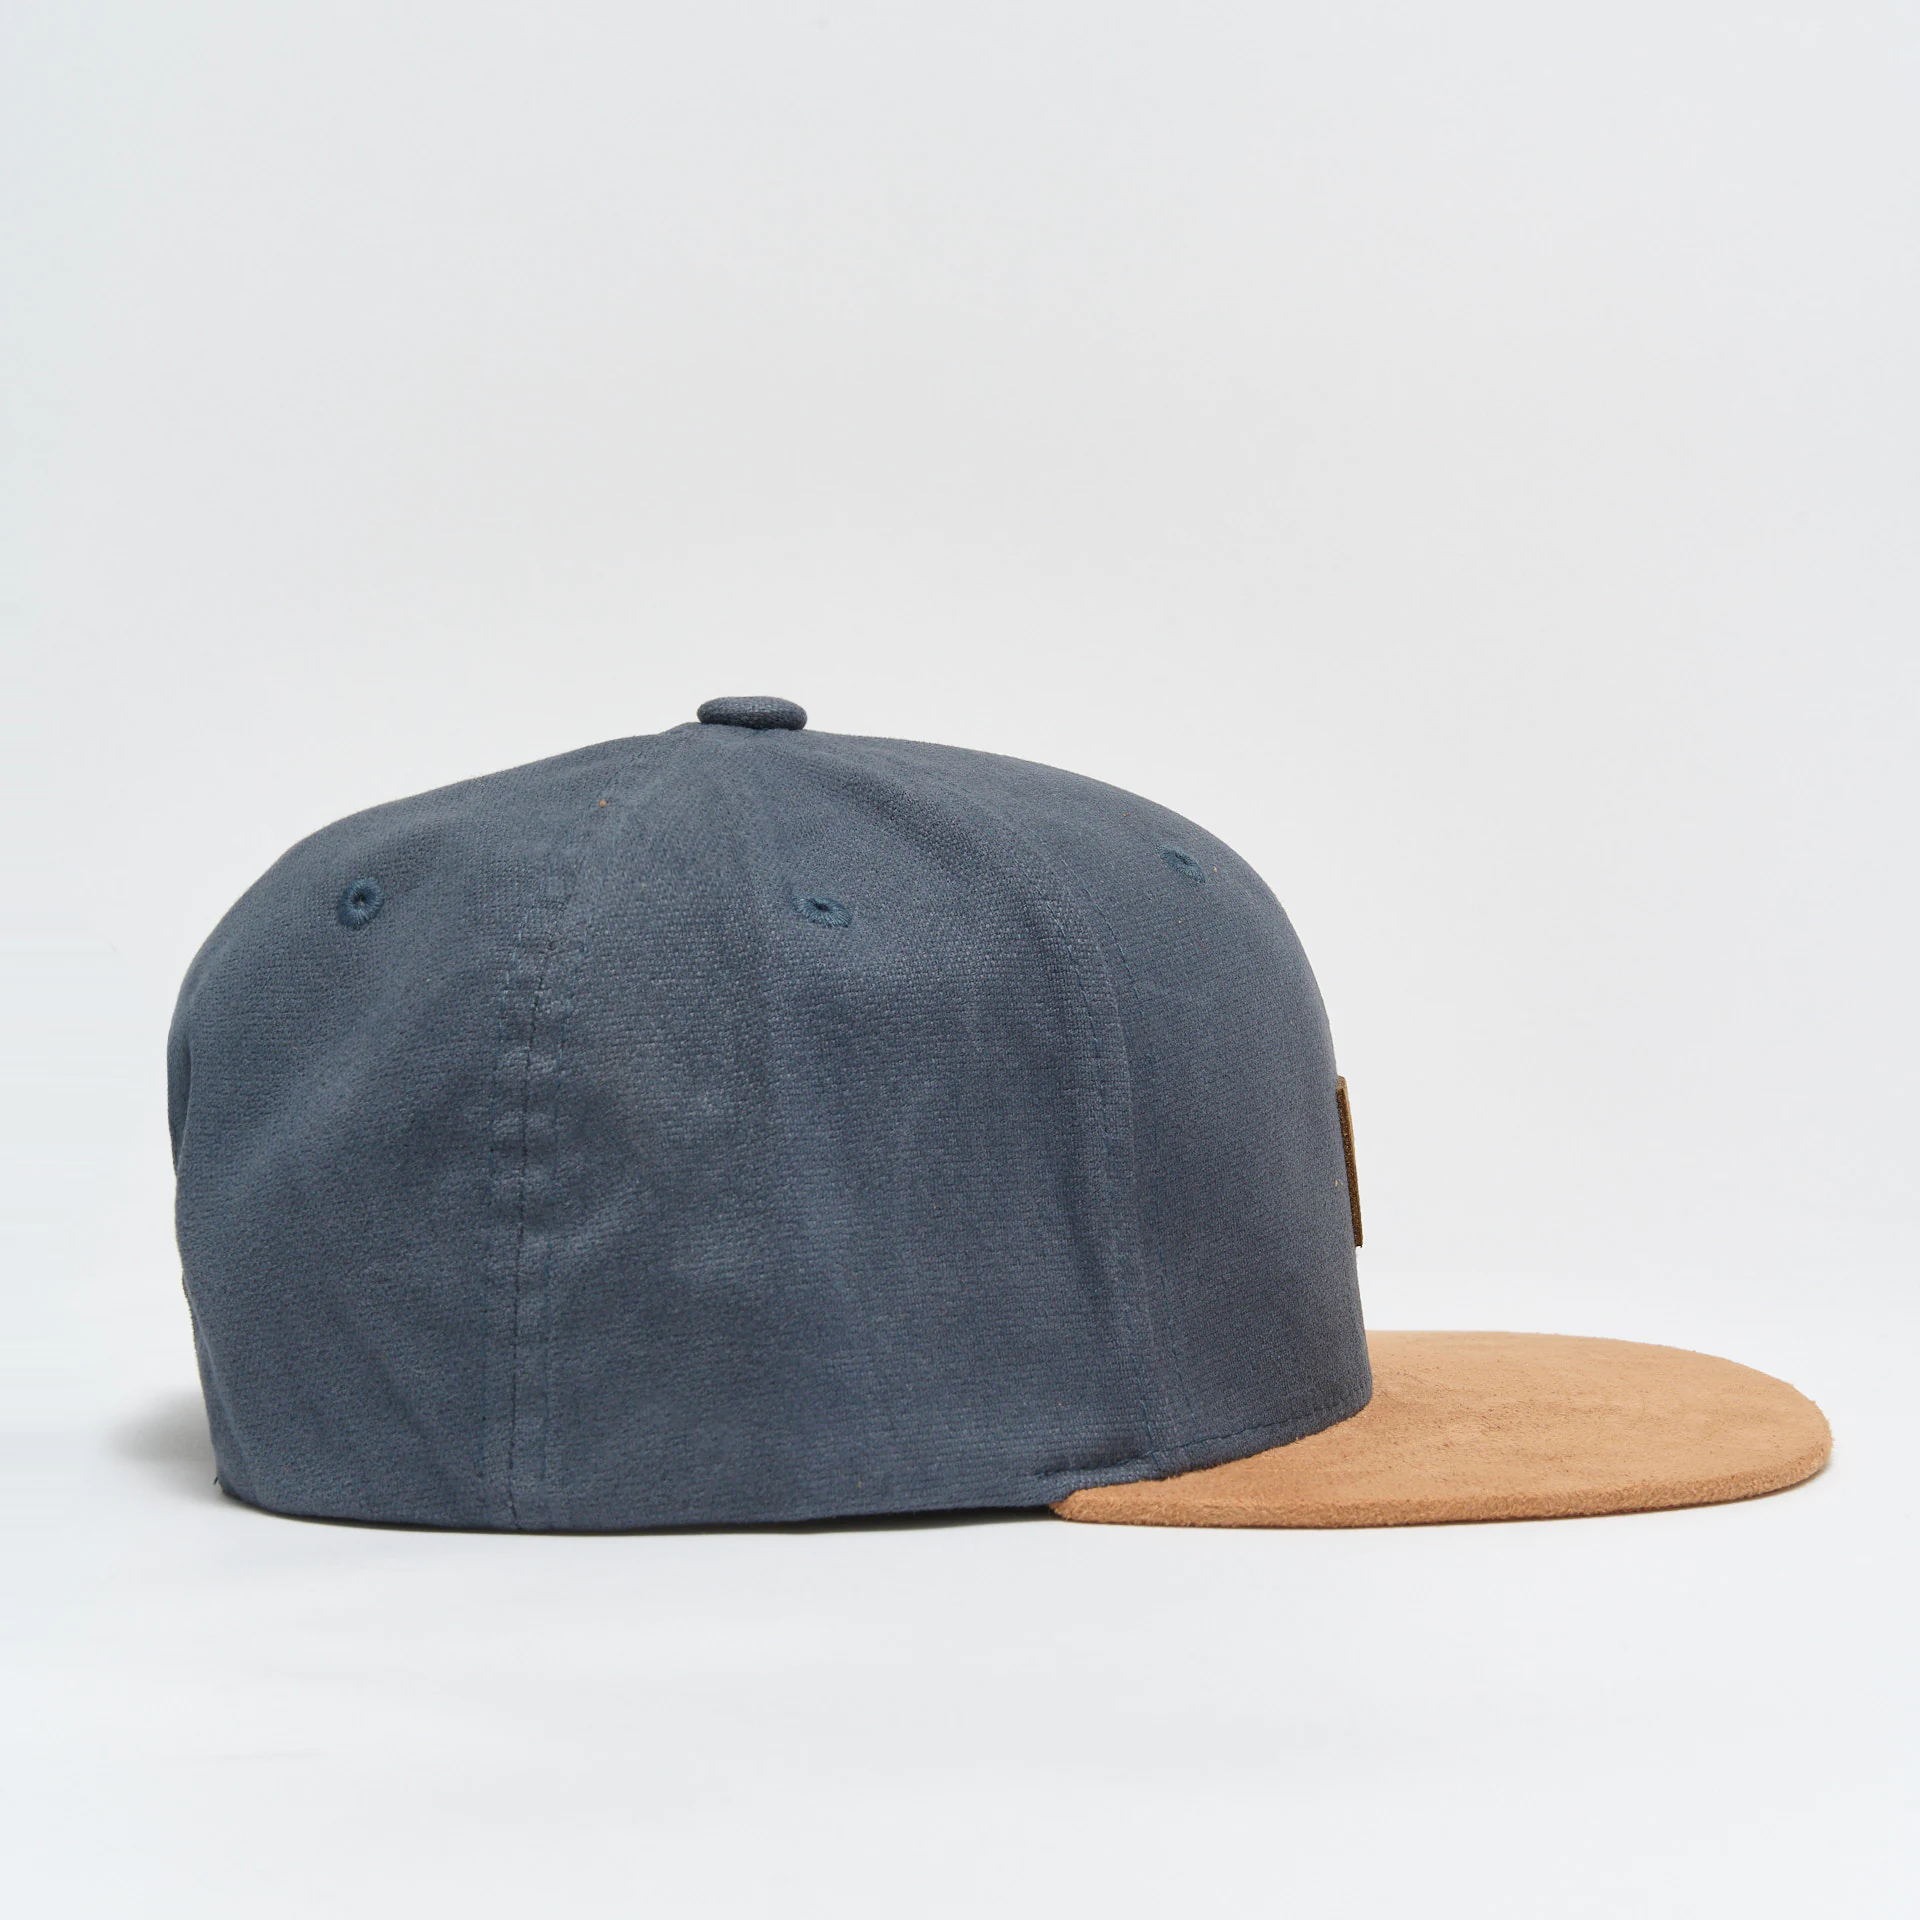 Reell Jeans Suede Snapback Cap Charcoal